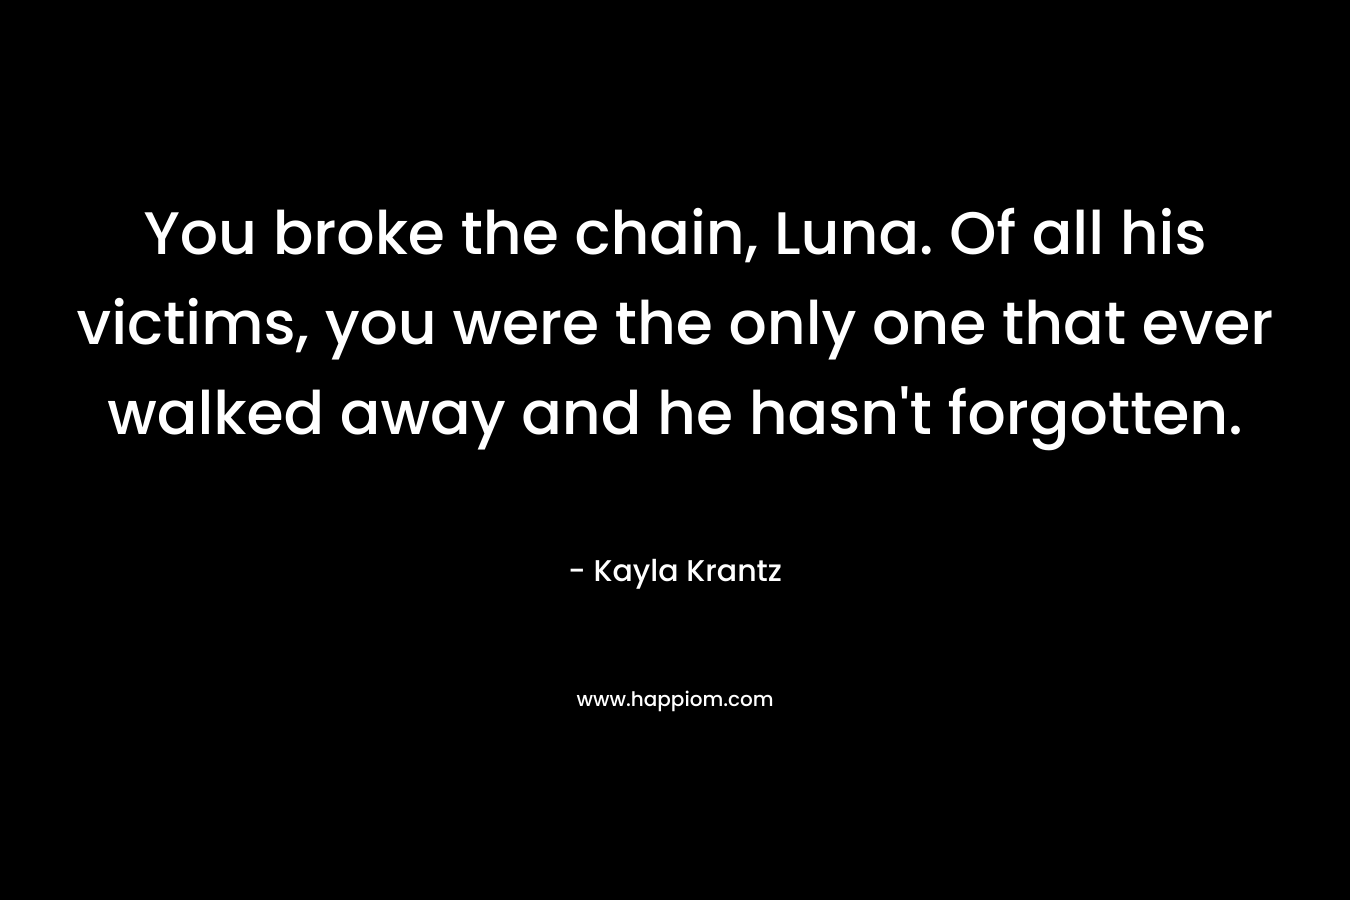 You broke the chain, Luna. Of all his victims, you were the only one that ever walked away and he hasn't forgotten.